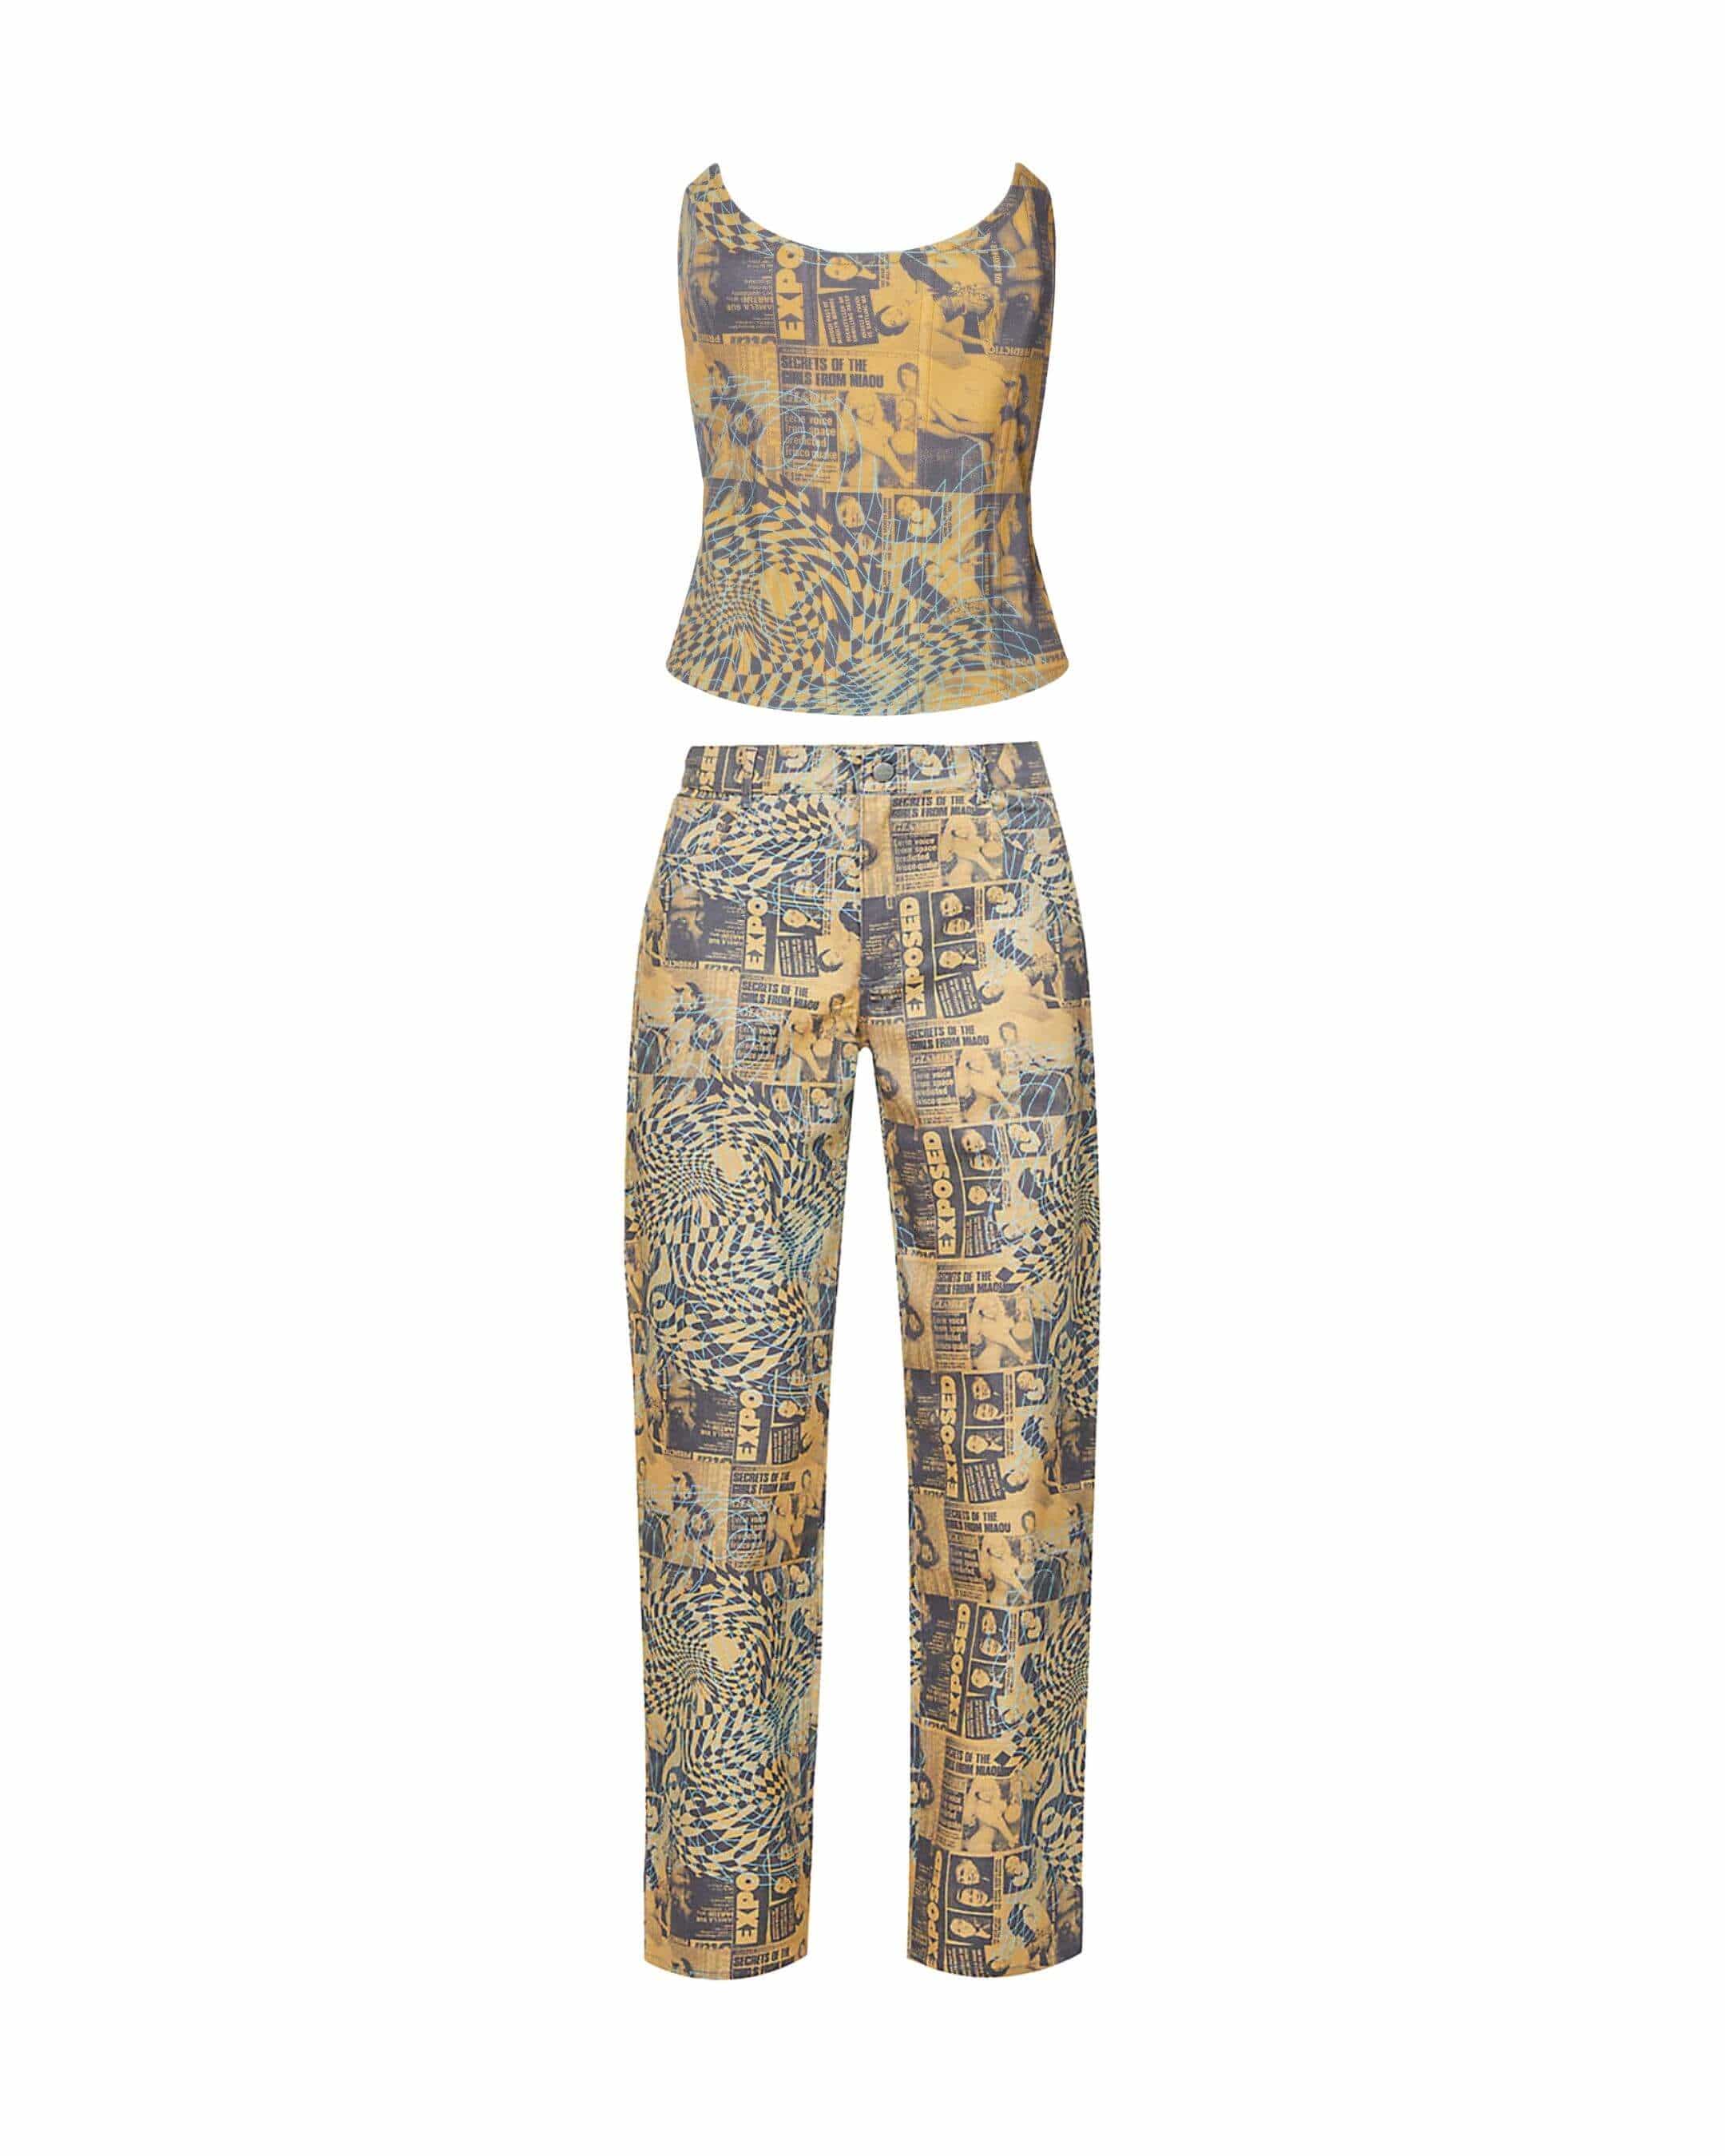 Leia Corset & Pants in Wanted Print